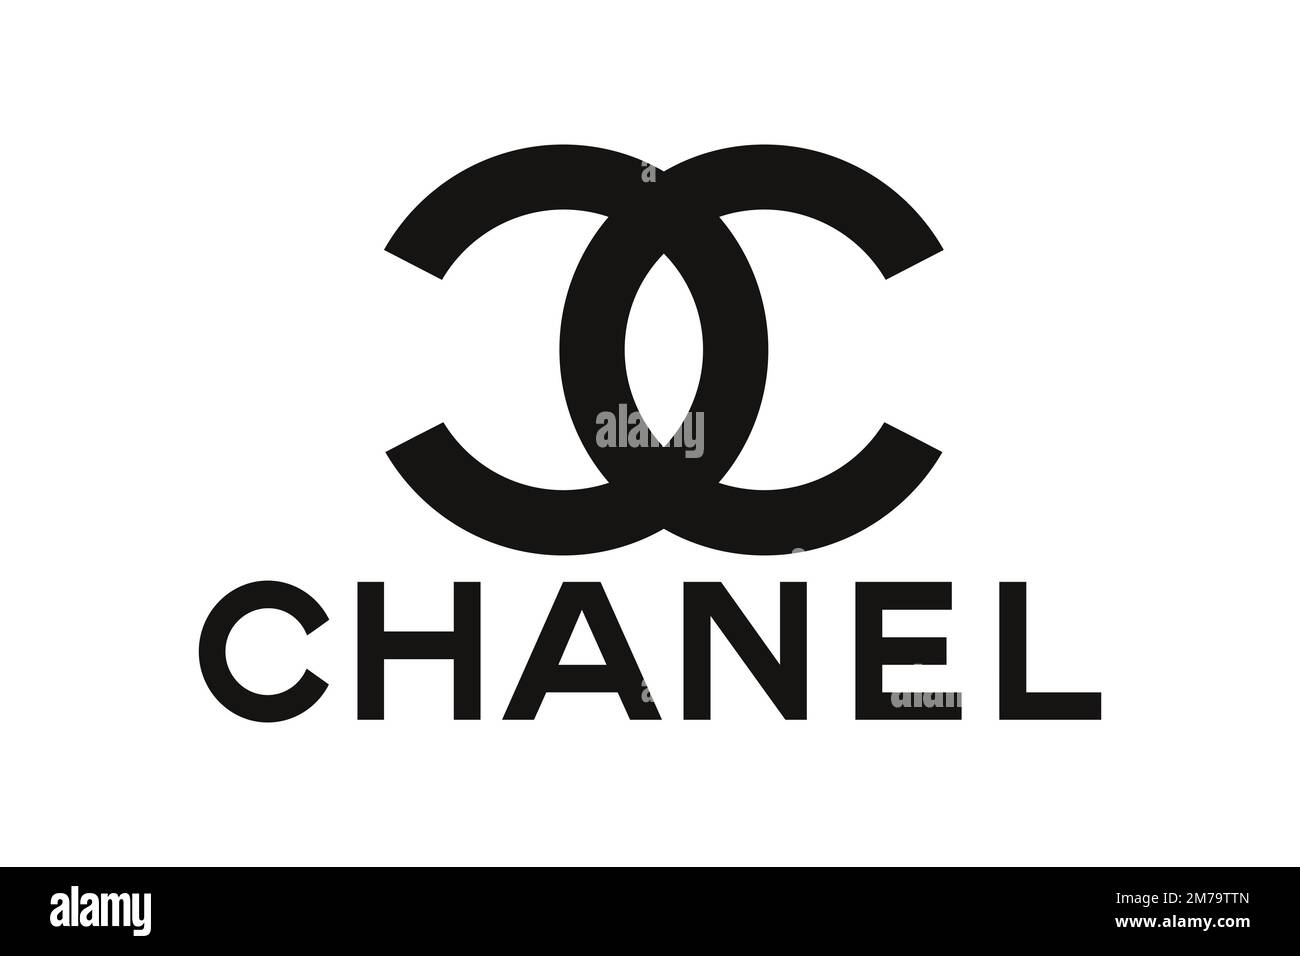 Chanel Cut Out Stock Images & Pictures - Alamy